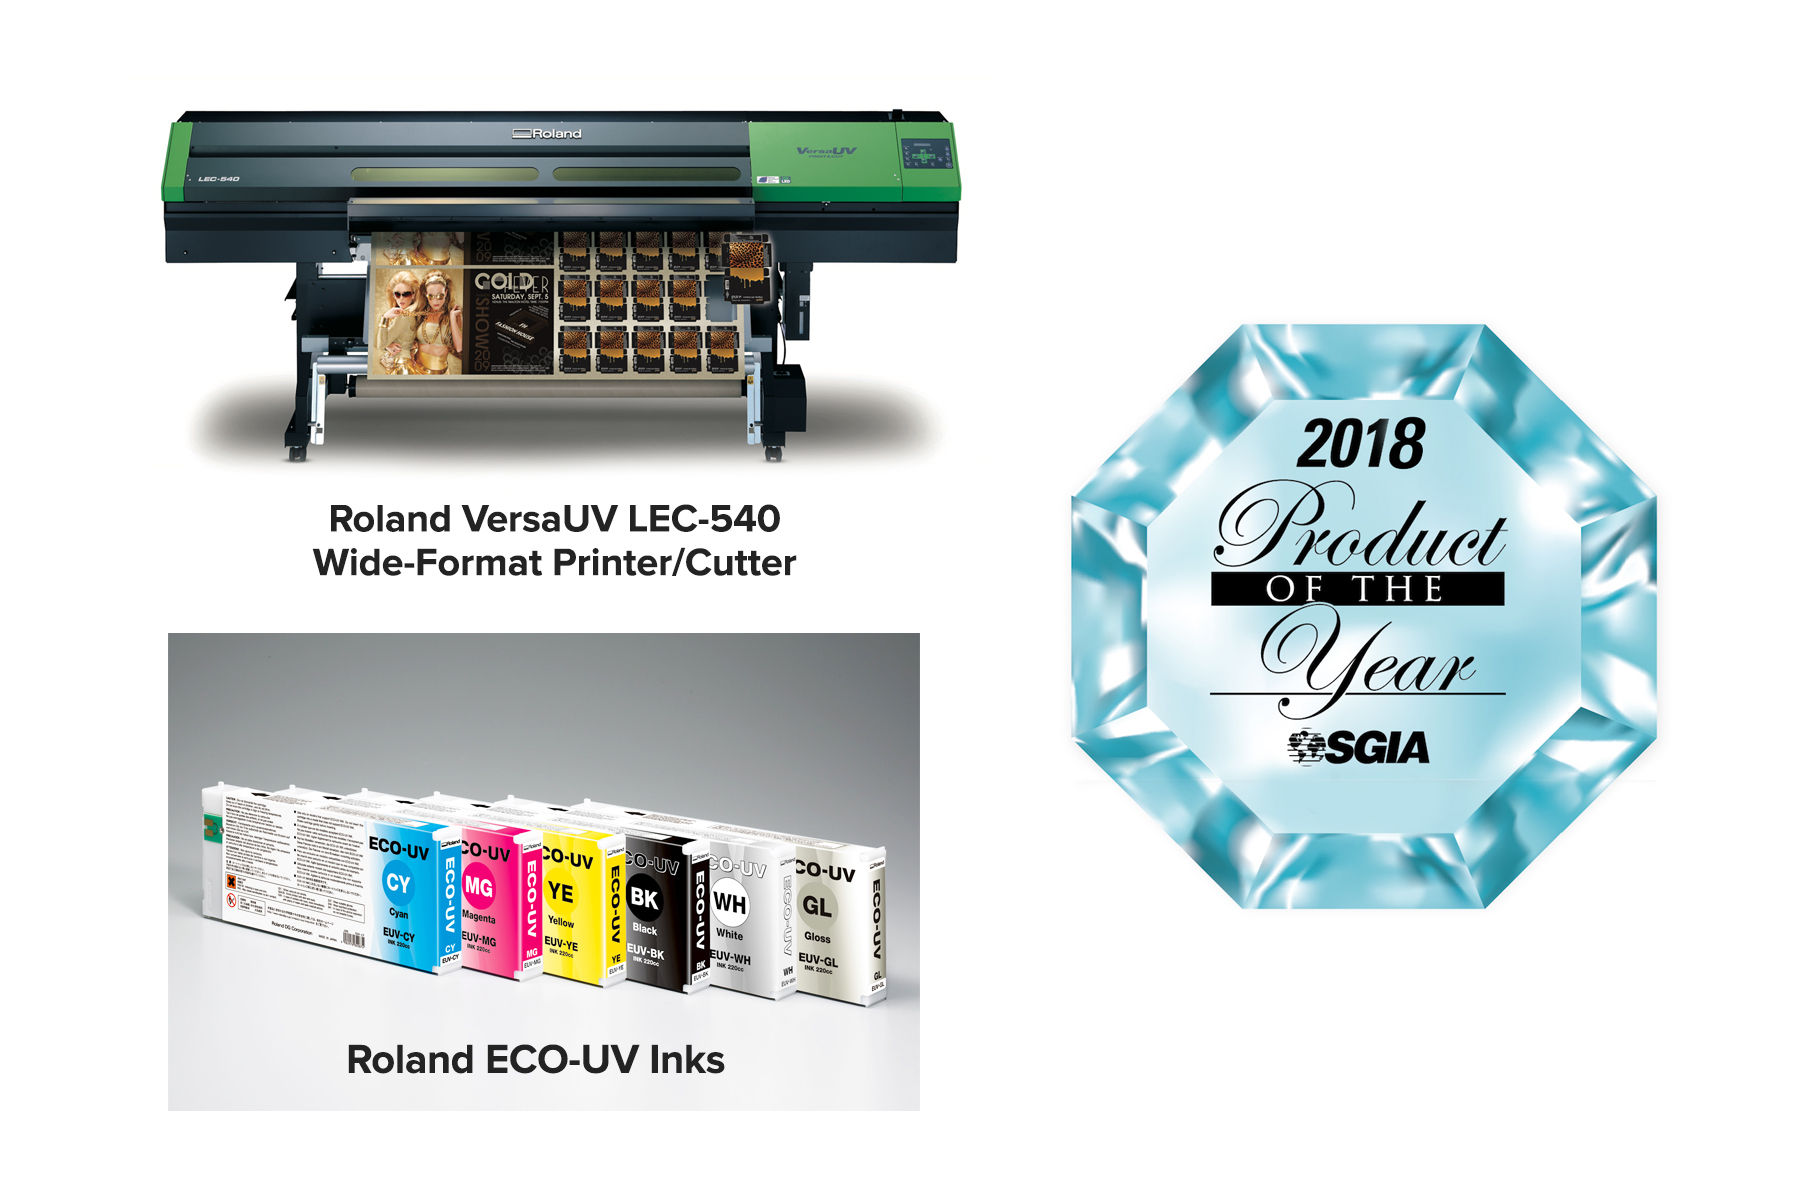 Roland's 2018 SGIA Product of the Year award-winning VersaUV LEC-540 printer/cutter and ECO-UV Inks